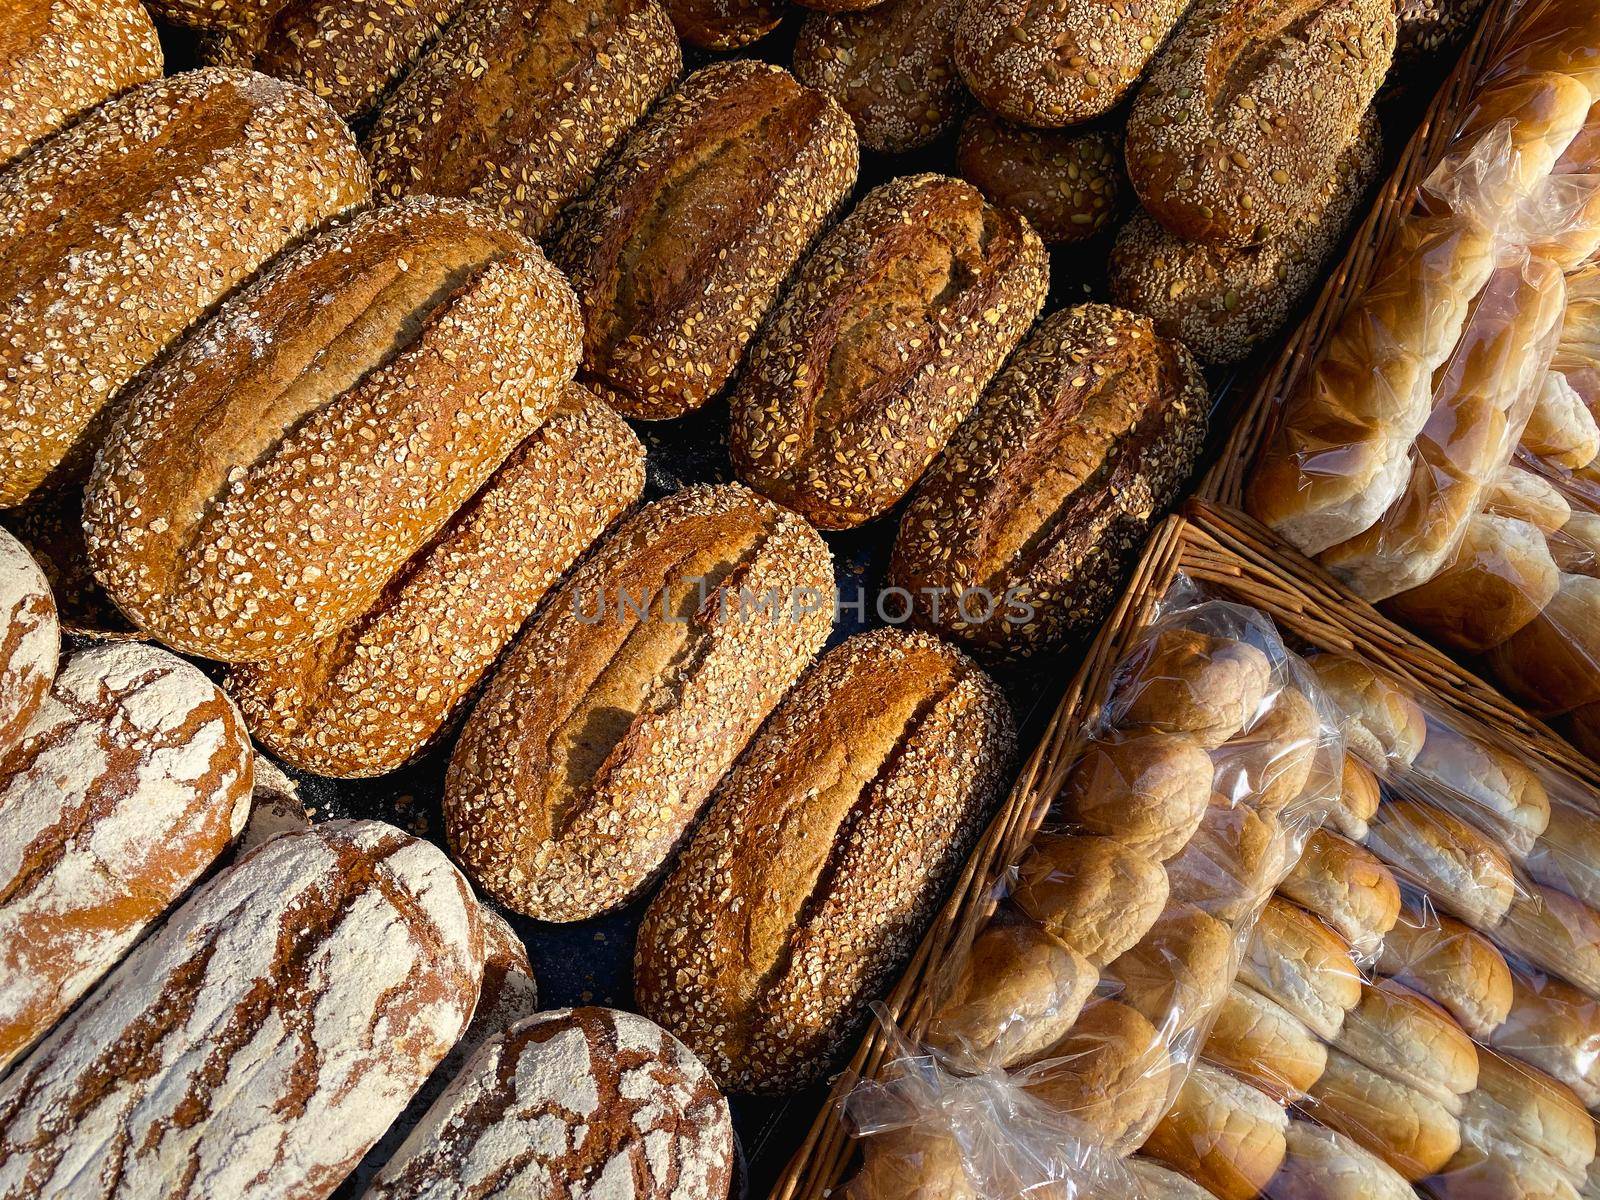 Different kinds of bakery product on the market in Utrecht, Netherlands